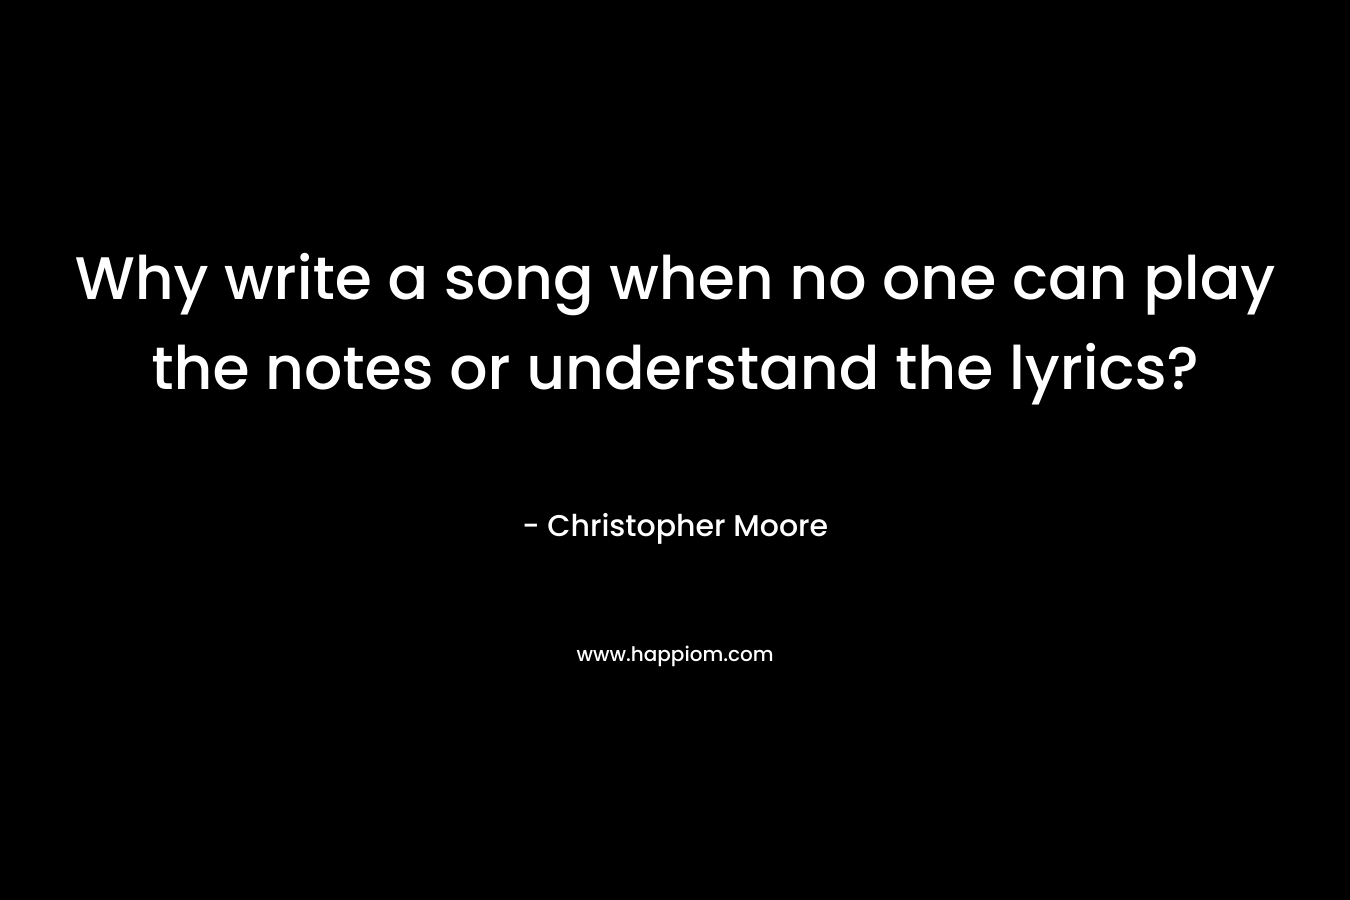 Why write a song when no one can play the notes or understand the lyrics? – Christopher Moore